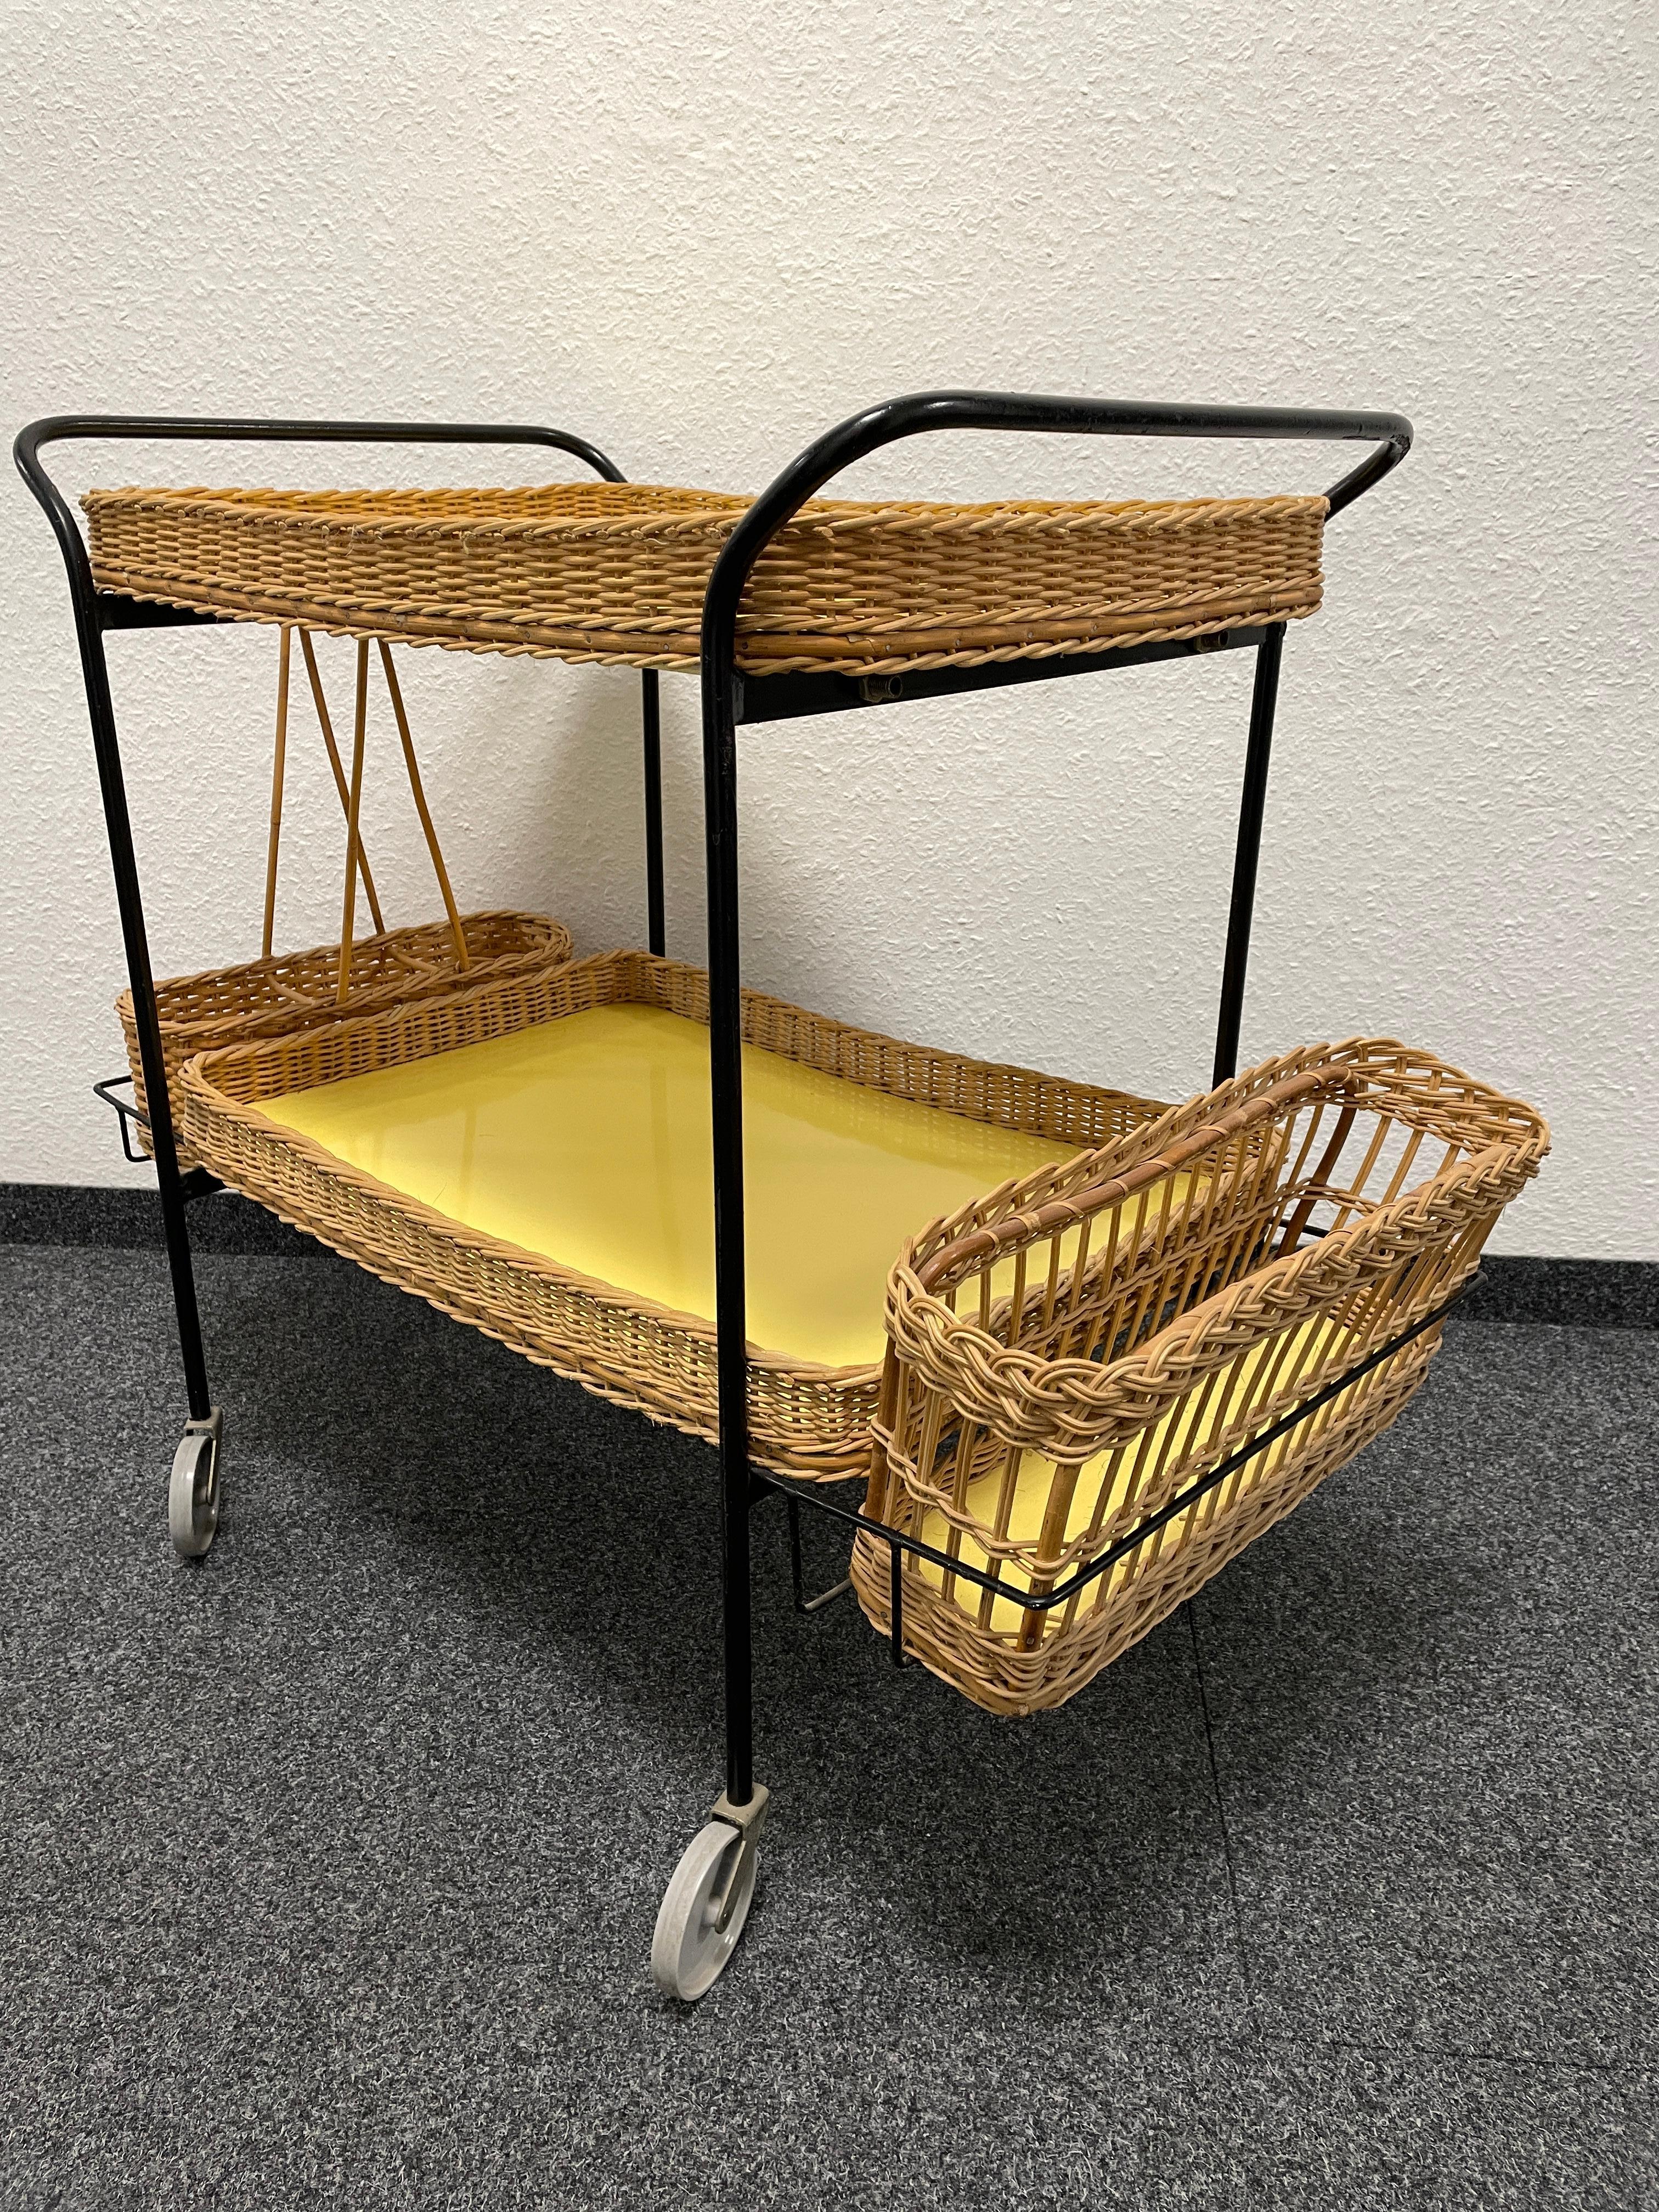 Hand-Crafted Wicker and Iron Bar Cart or Tea Trolley Table, German, 1950s For Sale